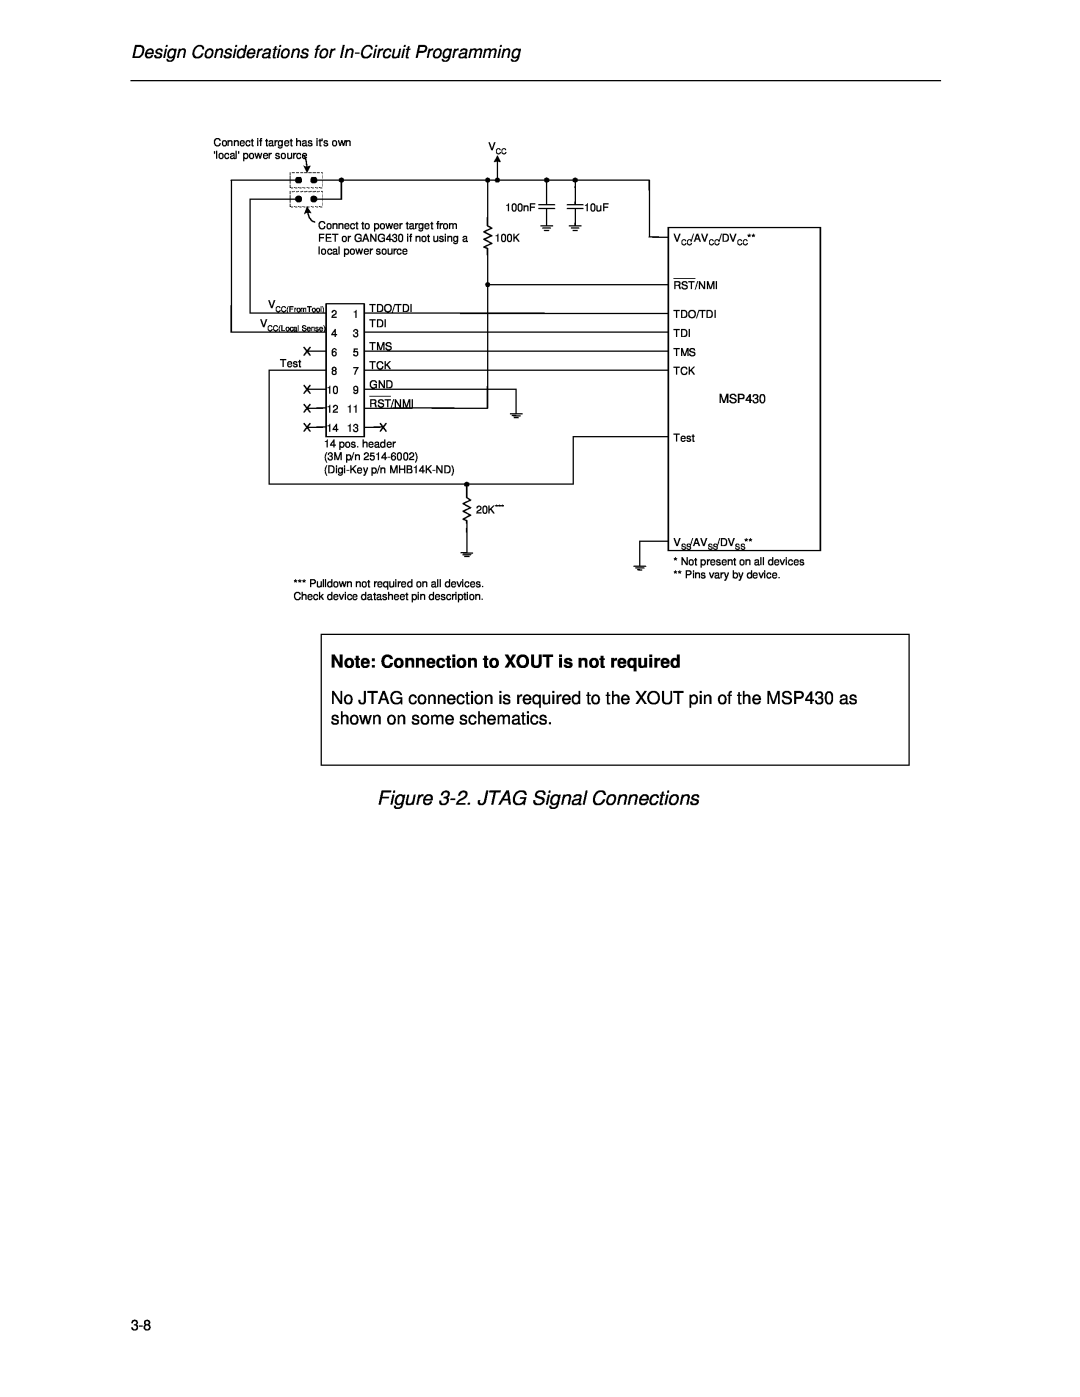 Texas Instruments MSP-FET430 manual 2. JTAG Signal Connections, Design Considerations for In-Circuit Programming, MSP430 